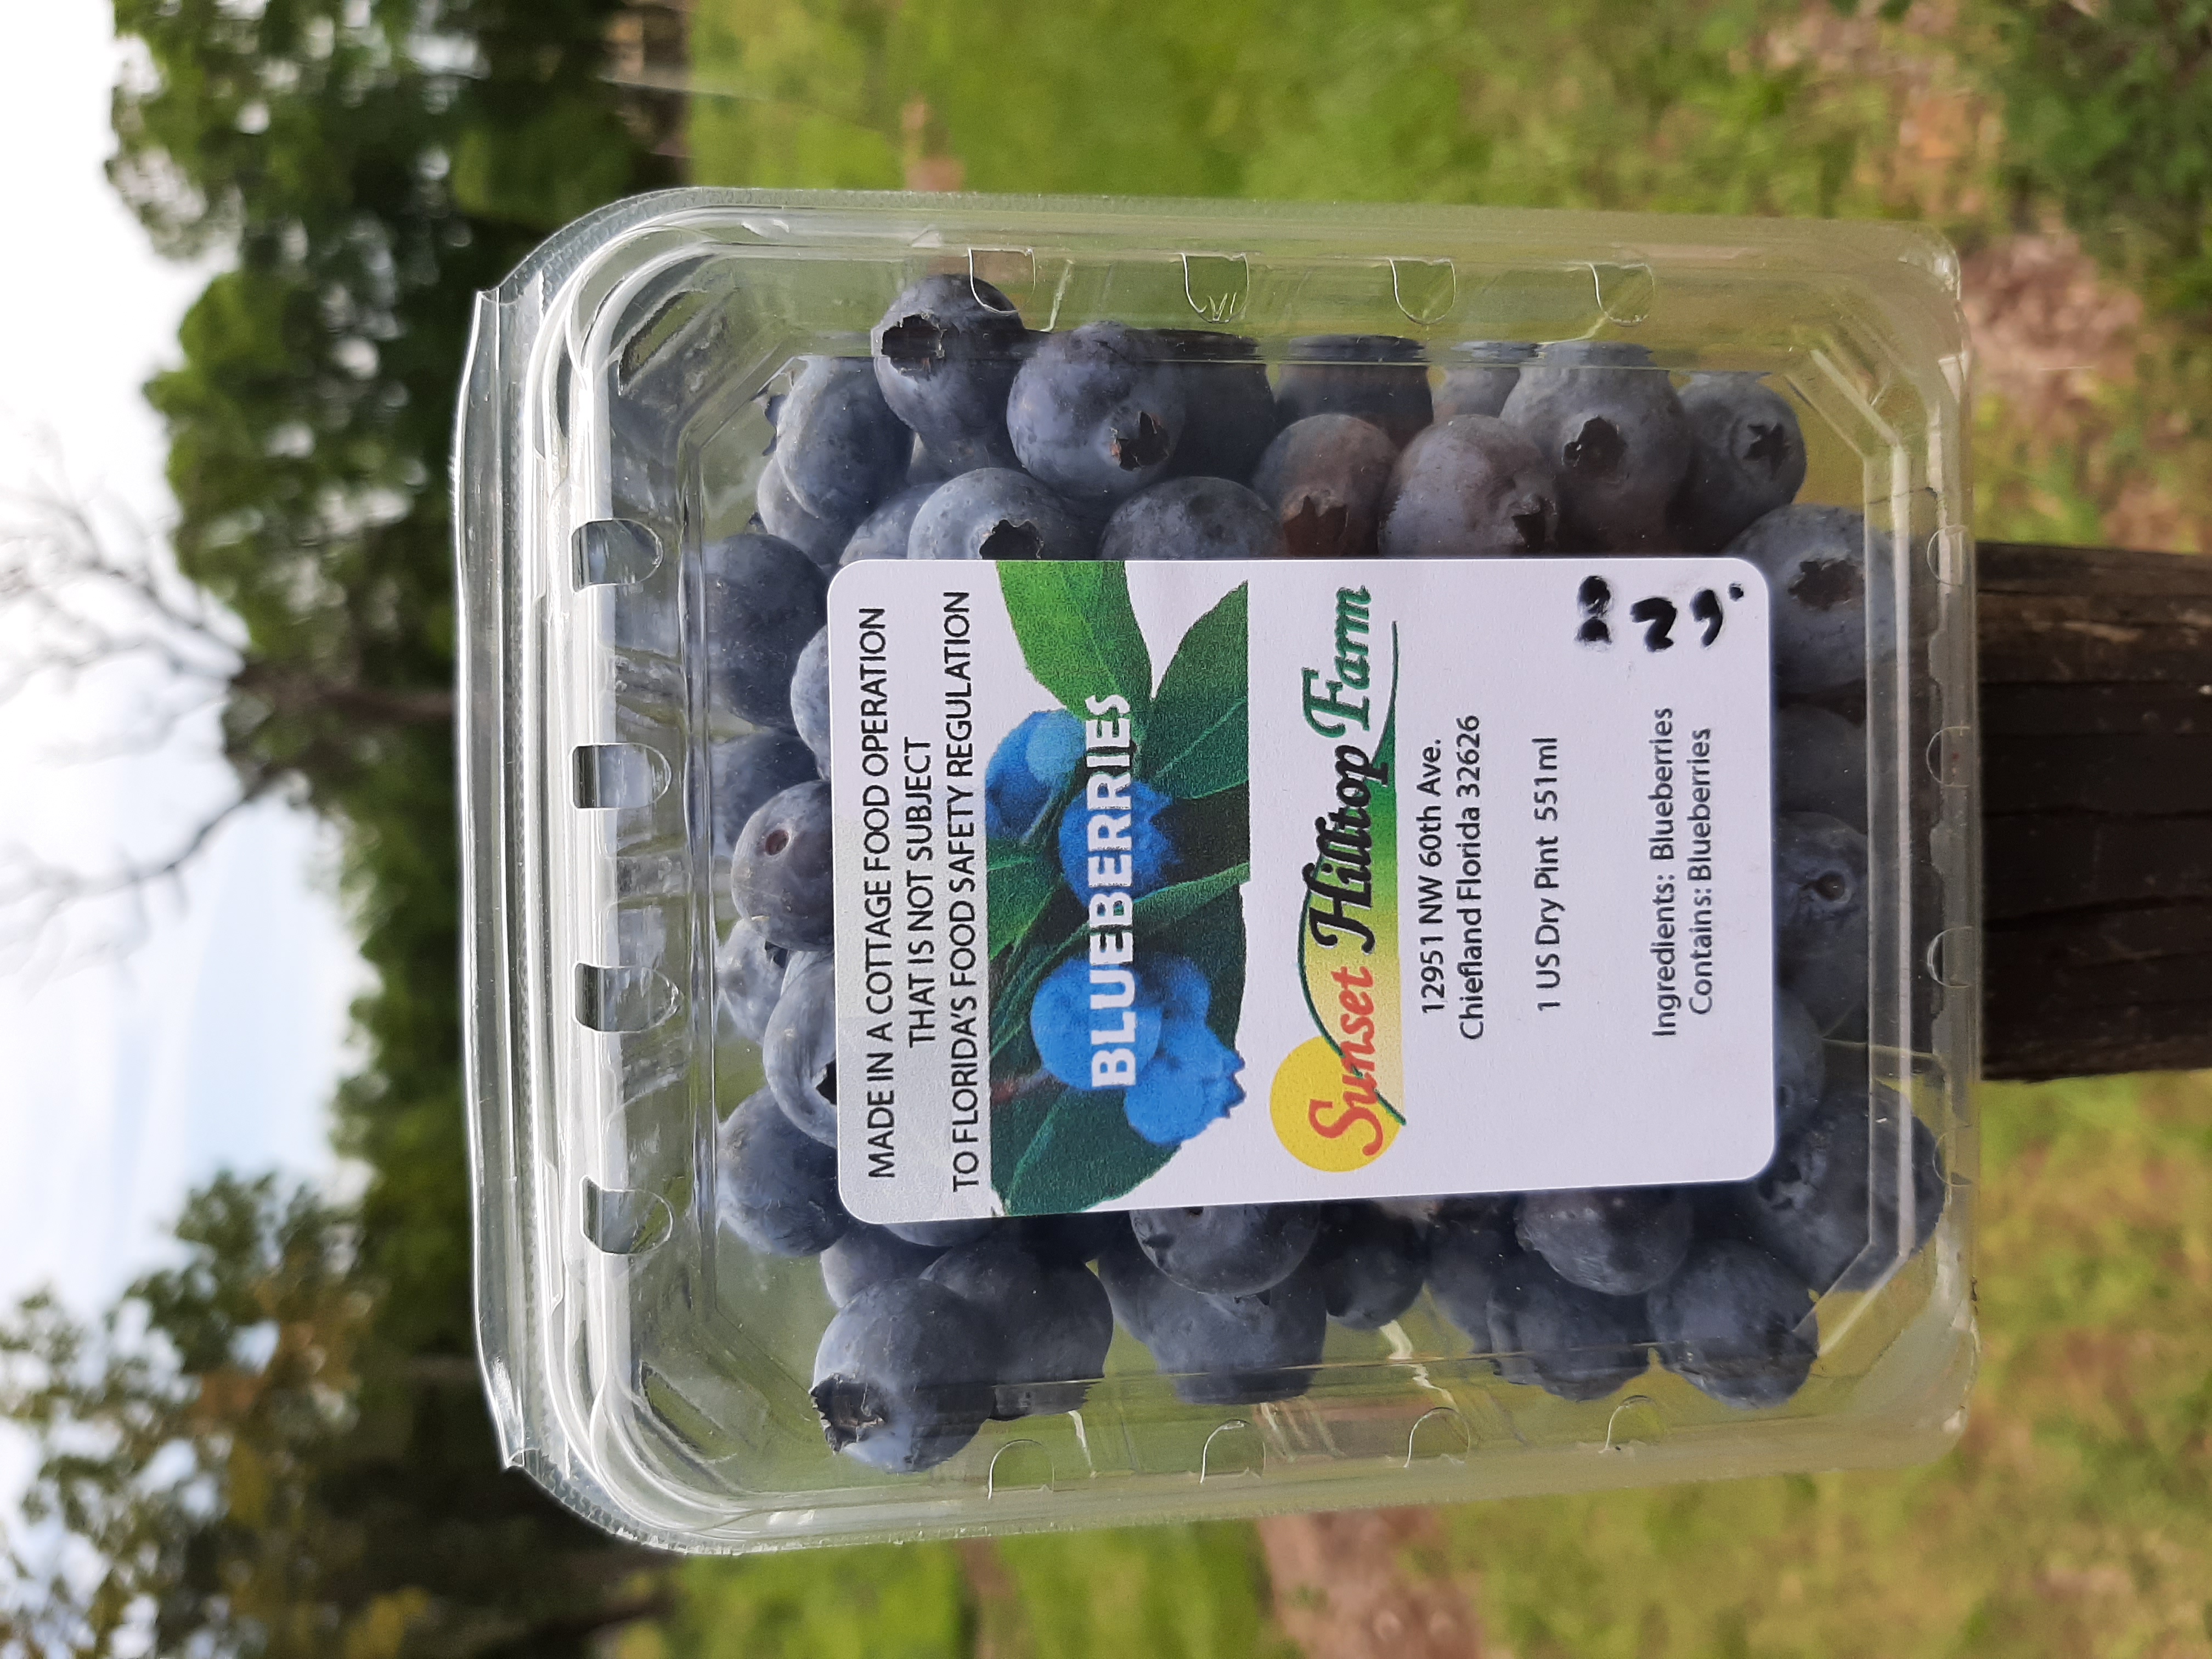 Our Container of Blueberries